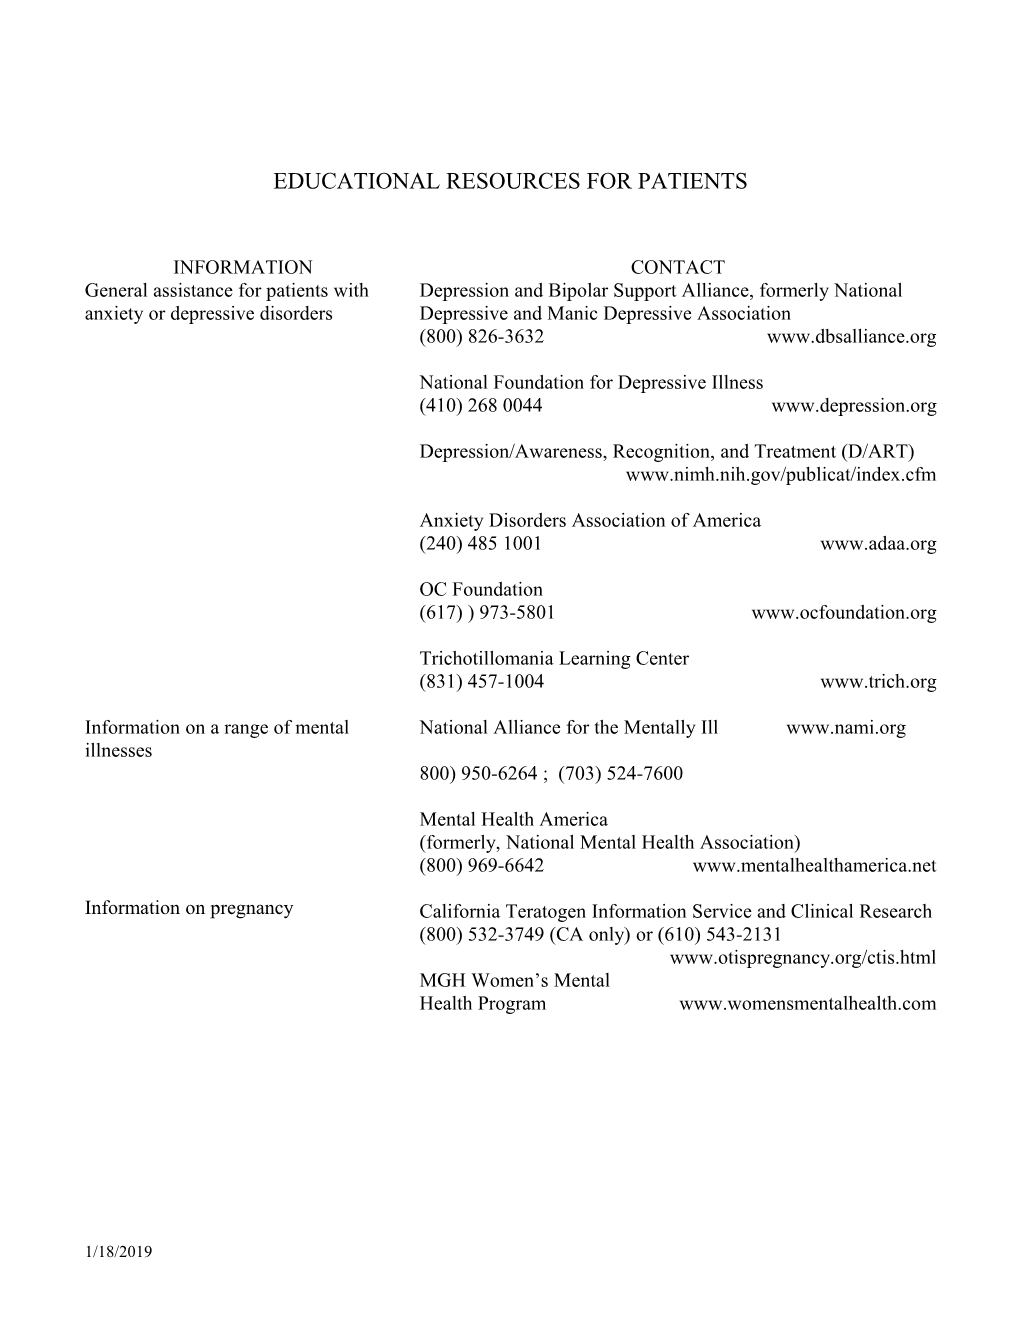 Educational Resources for Patients